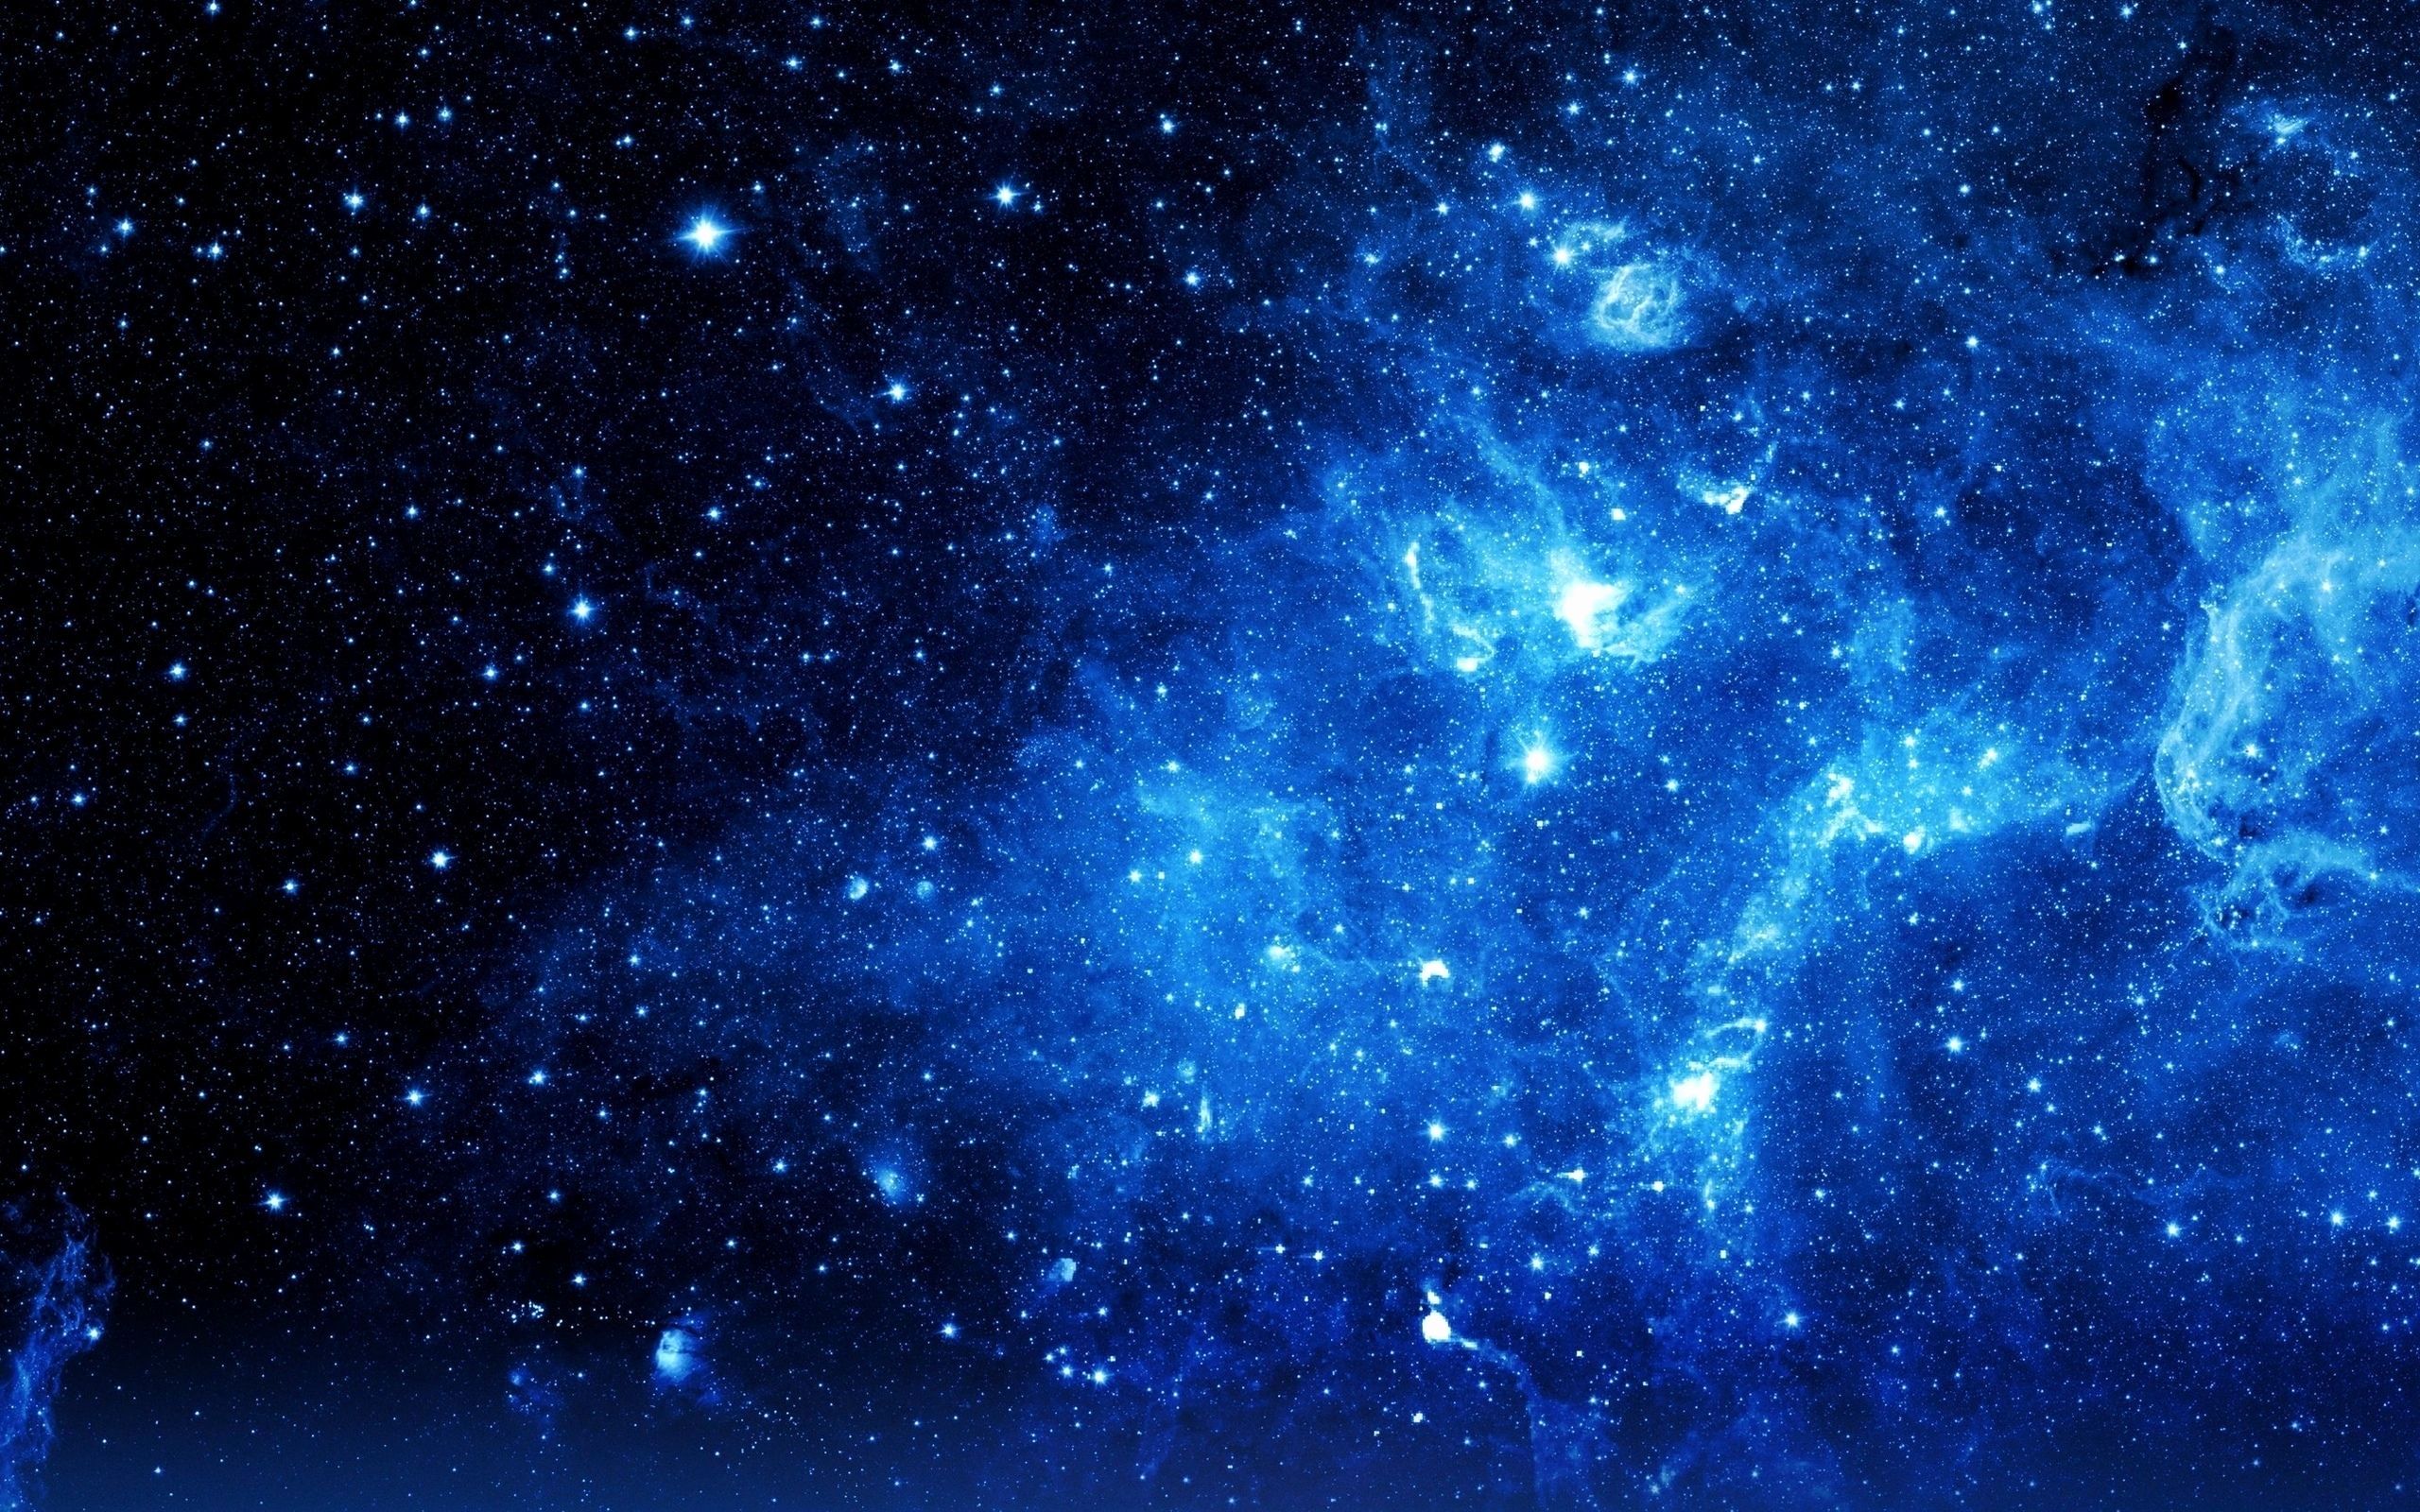 Galaxy Background Blue Lovely Blue Galaxy Wallpaper Ideas of The Hudson